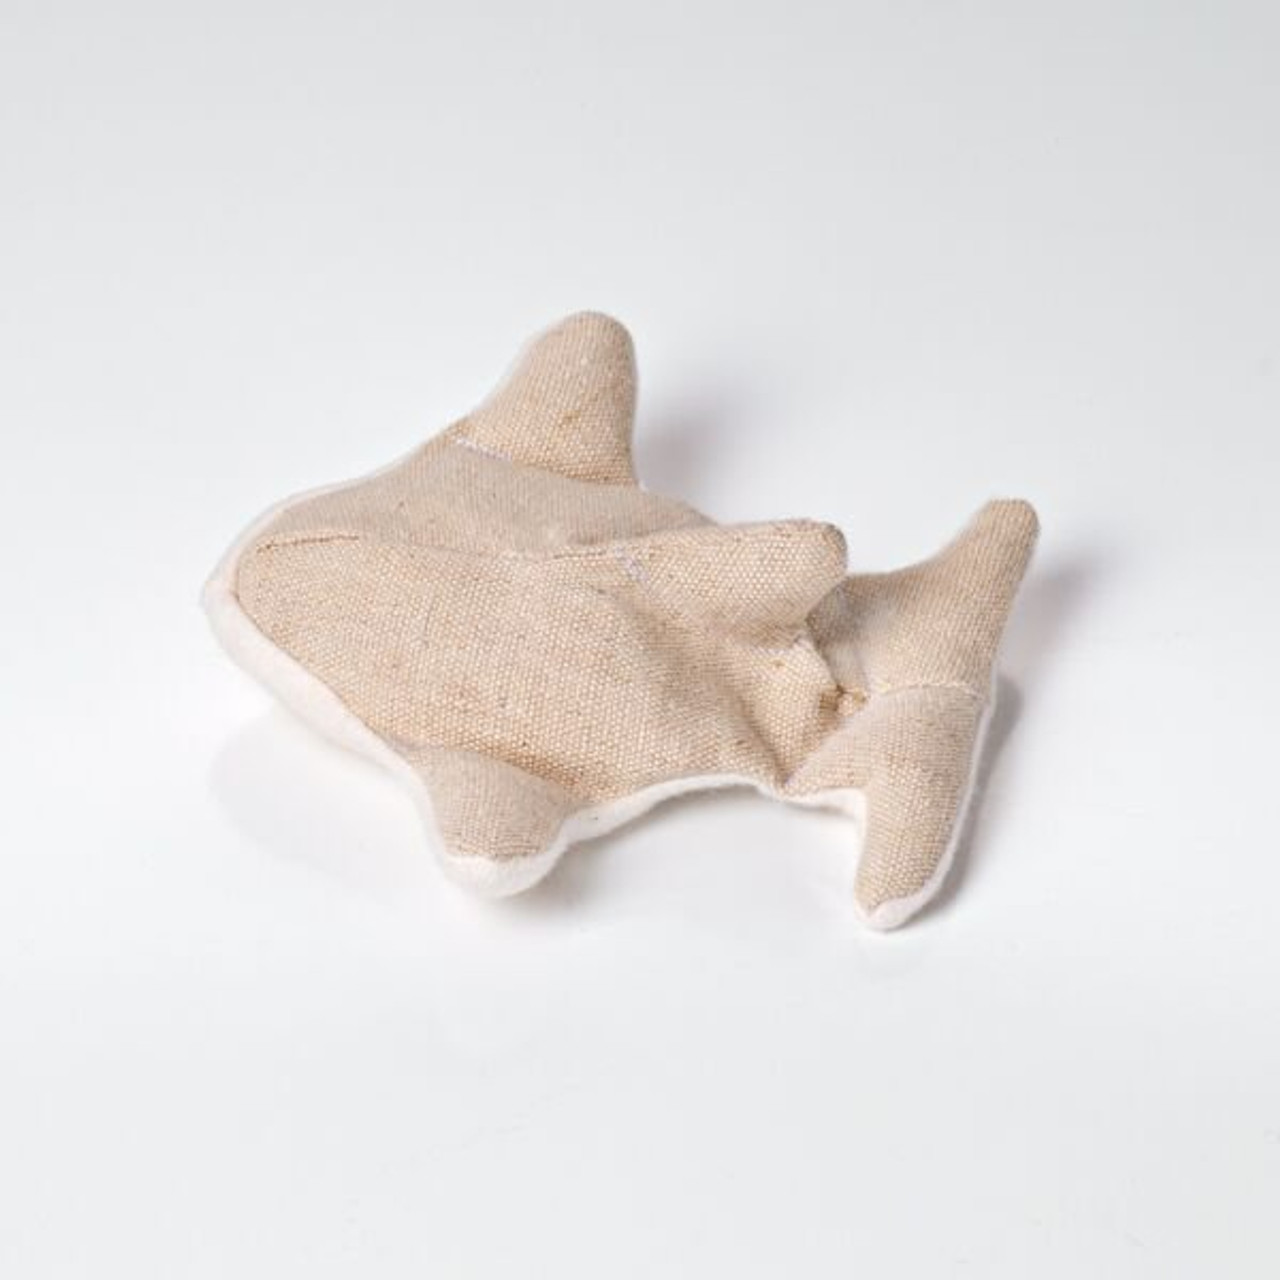 Dogs Love Our Small Hemp Orca! Natural Hemp Dog Toy